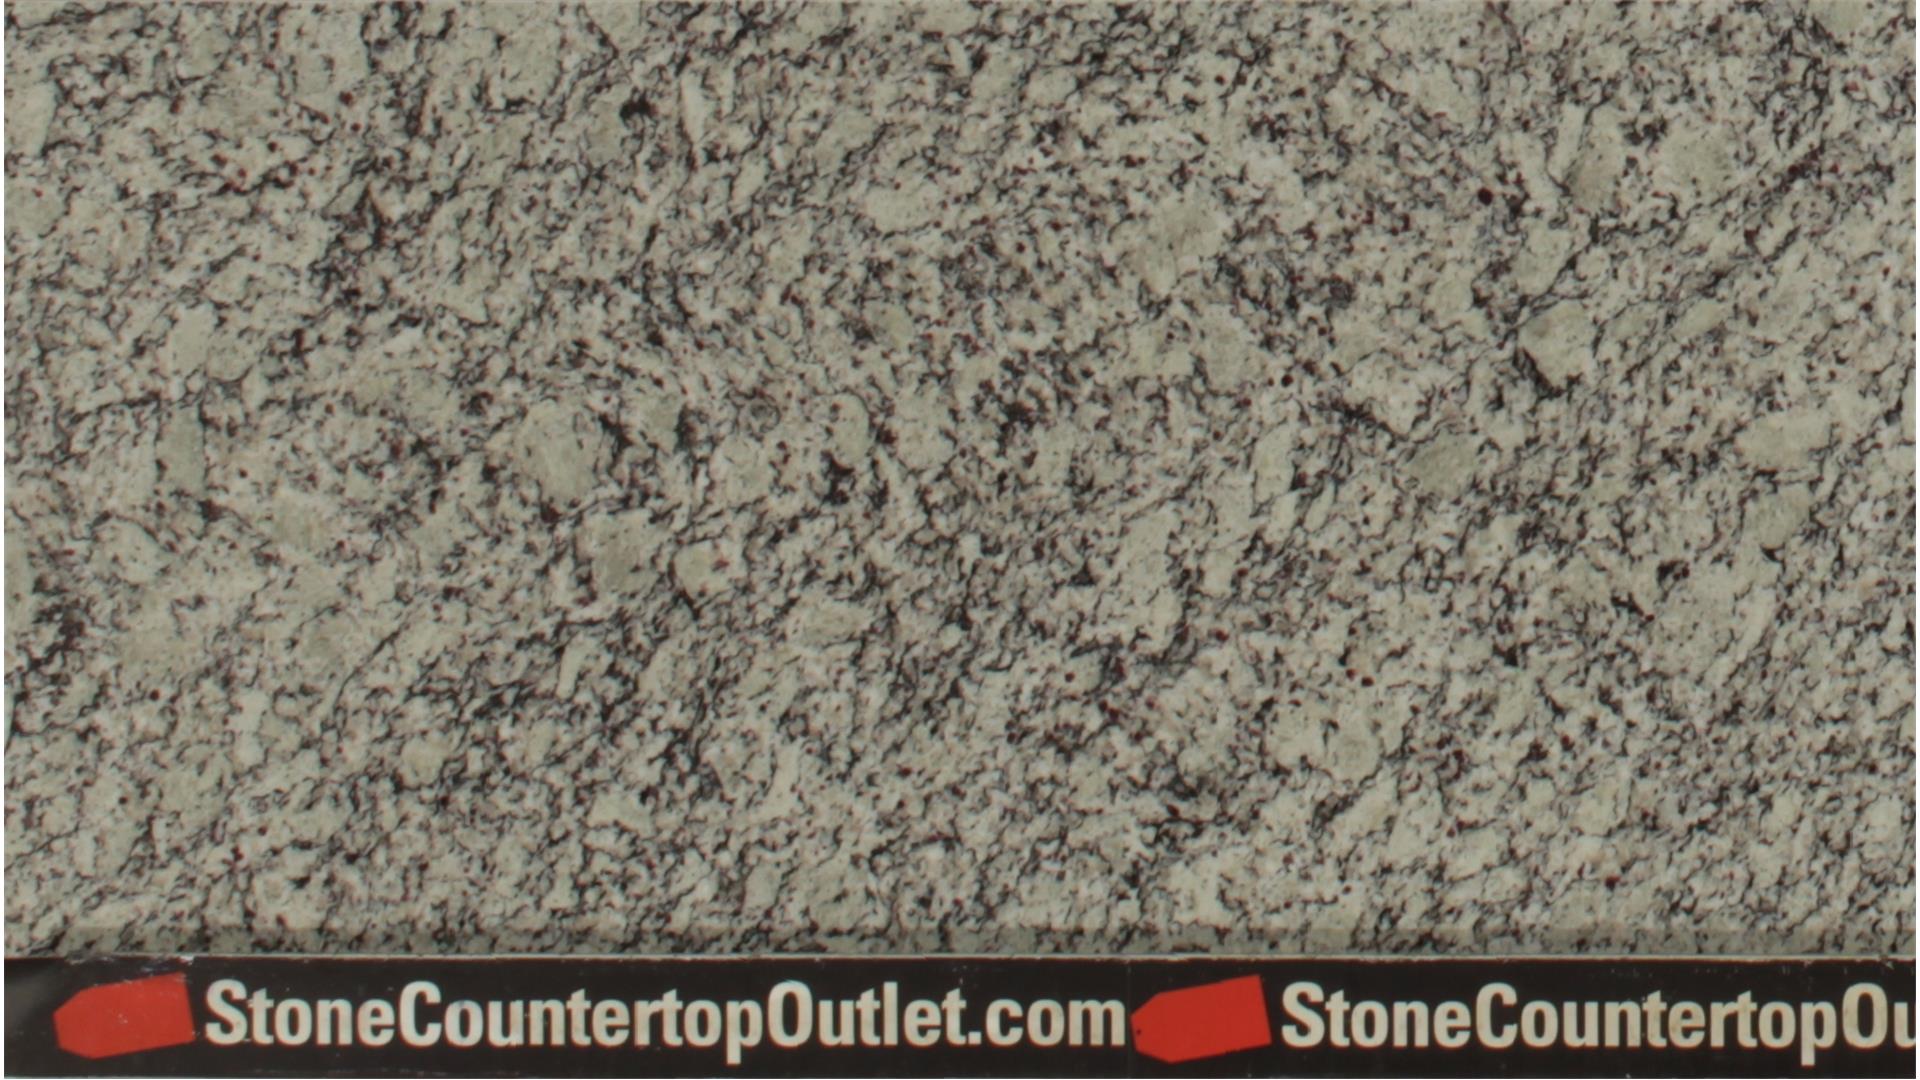 Slabs Stone Countertop Outlet